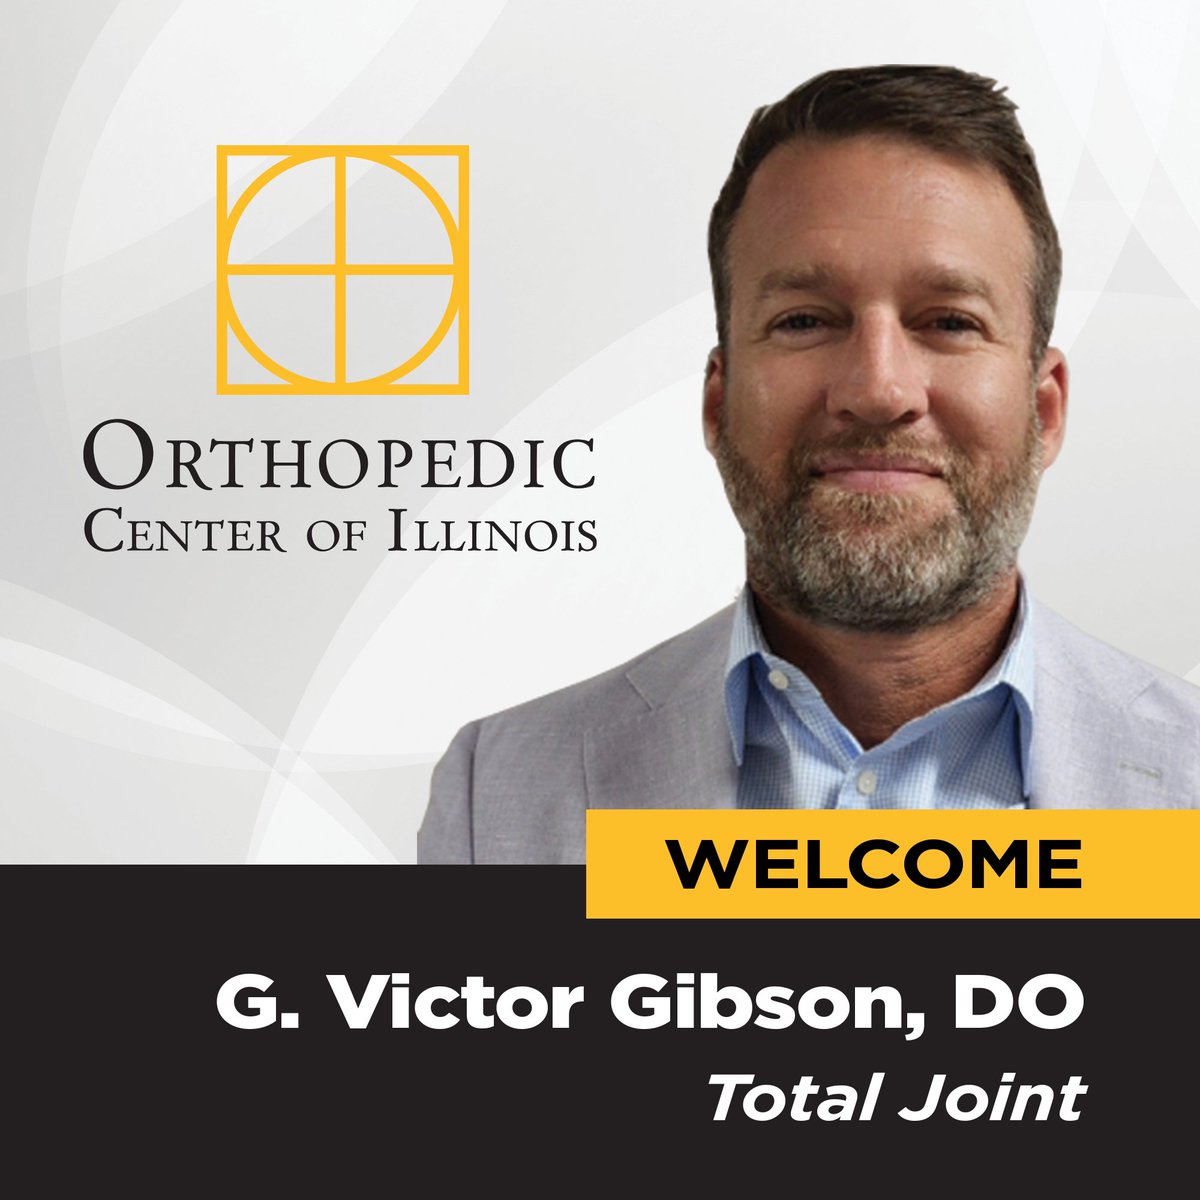 Please join us in welcoming G. Victor Gibson, DO to the Orthopedic Center of Illinois. Dr. Gibson is a board-certified orthopedic surgeon who specializes in hip and knee replacements. He is now accepting new patients at our Springfield and Litchfield locations. #AskForOCI